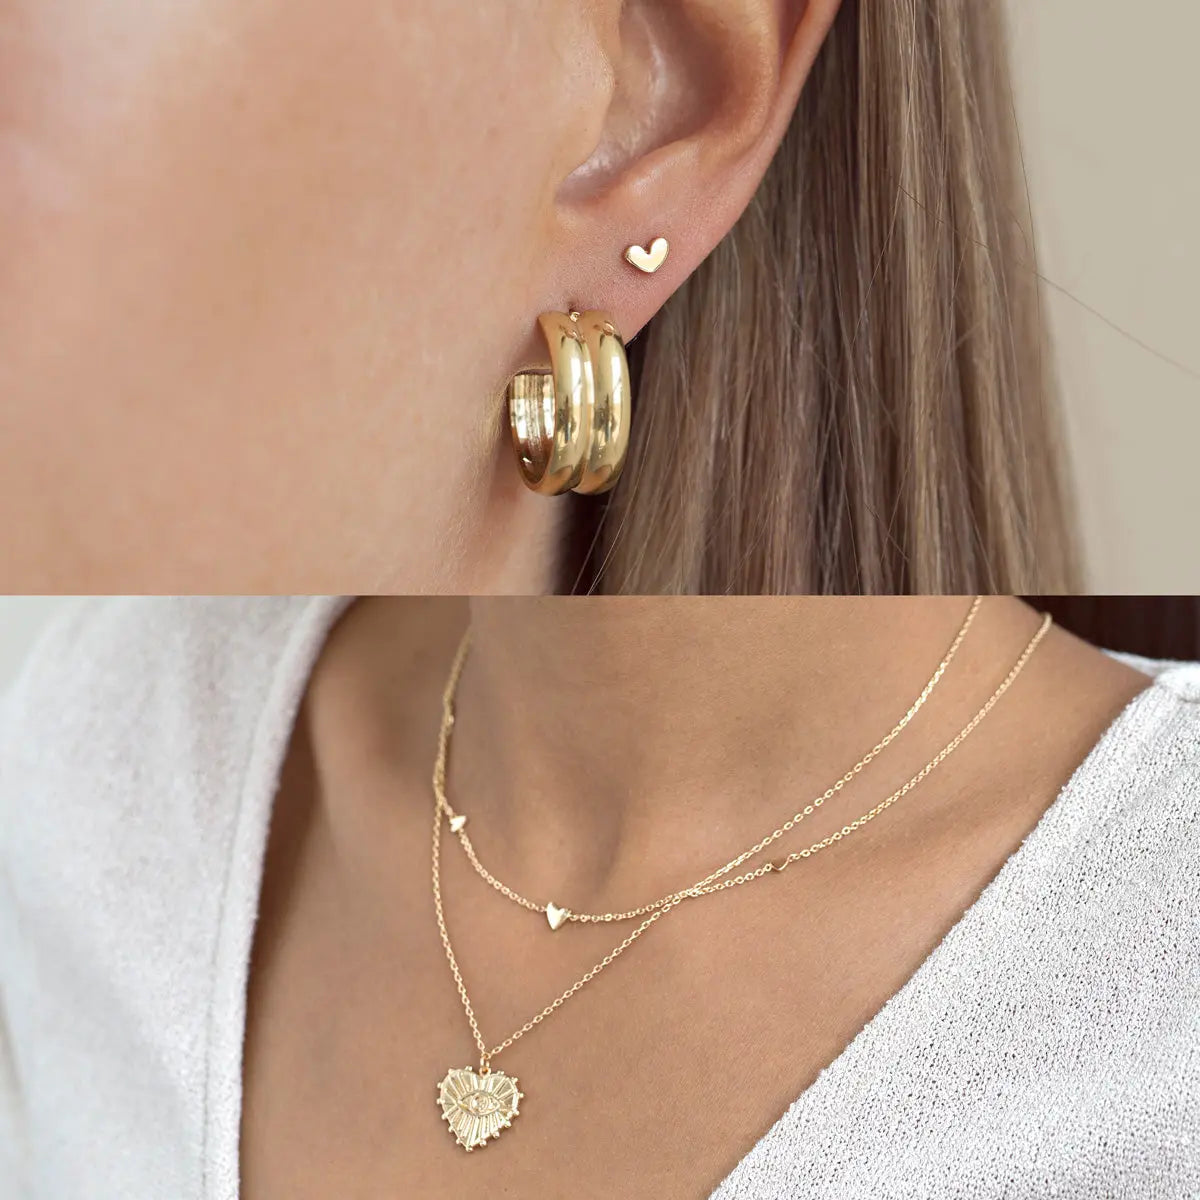 Heart Set with Earring Studs and Necklace